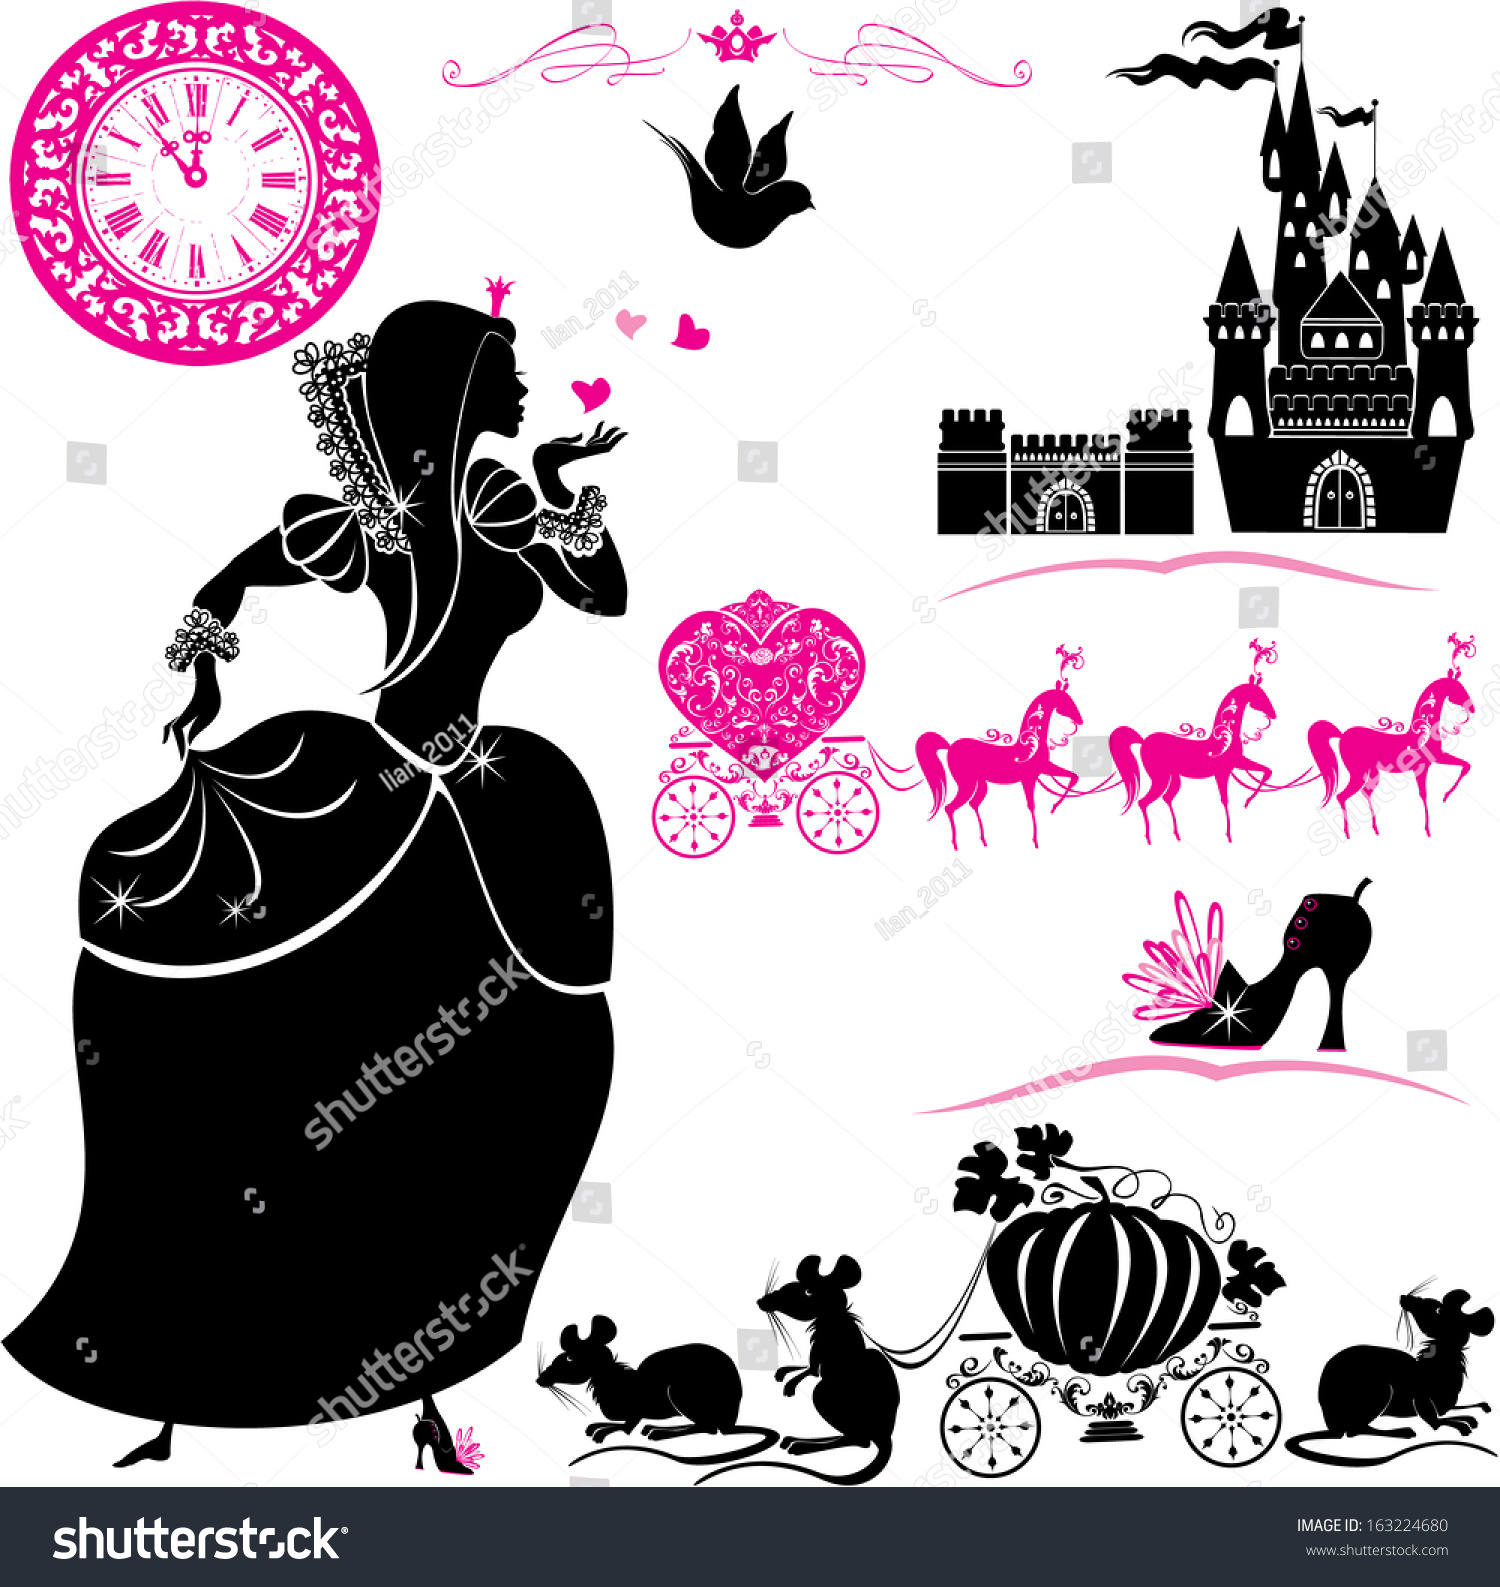 SVG of Fairytale Set - silhouettes of Cinderella, Pumpkin carriage with mouses, castle and clock. svg